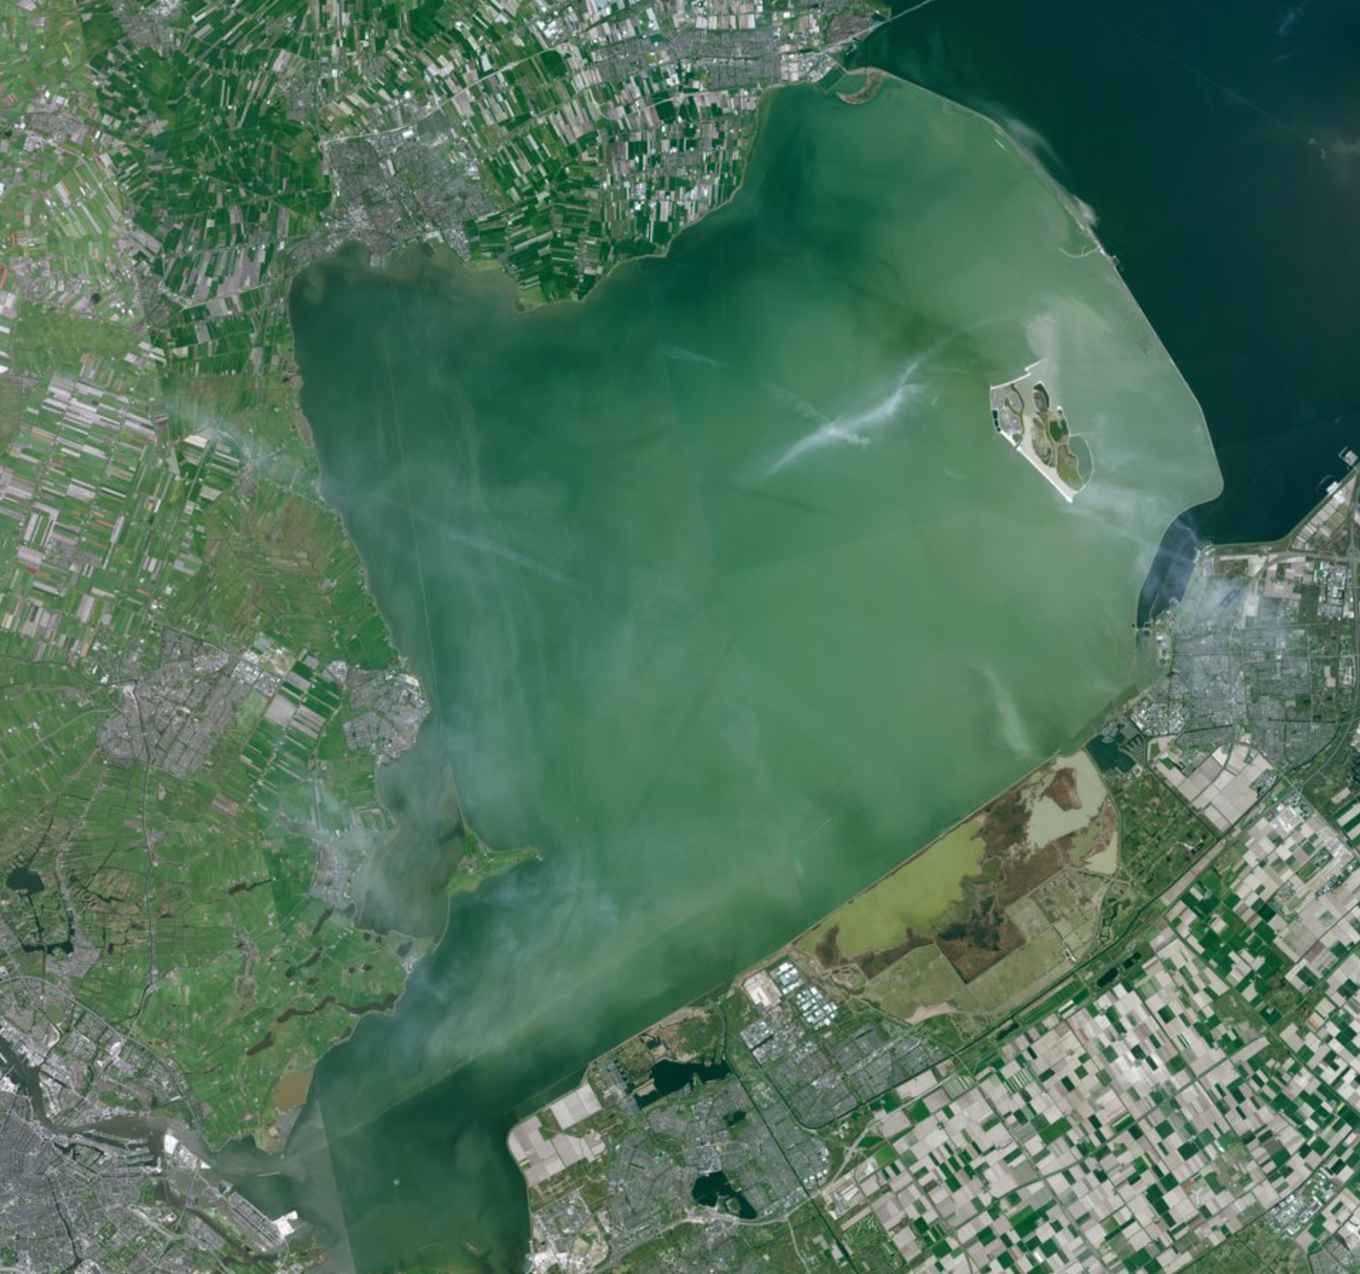 Satellite picture of Lake Markermeer where it can be seen the water is very turbid.